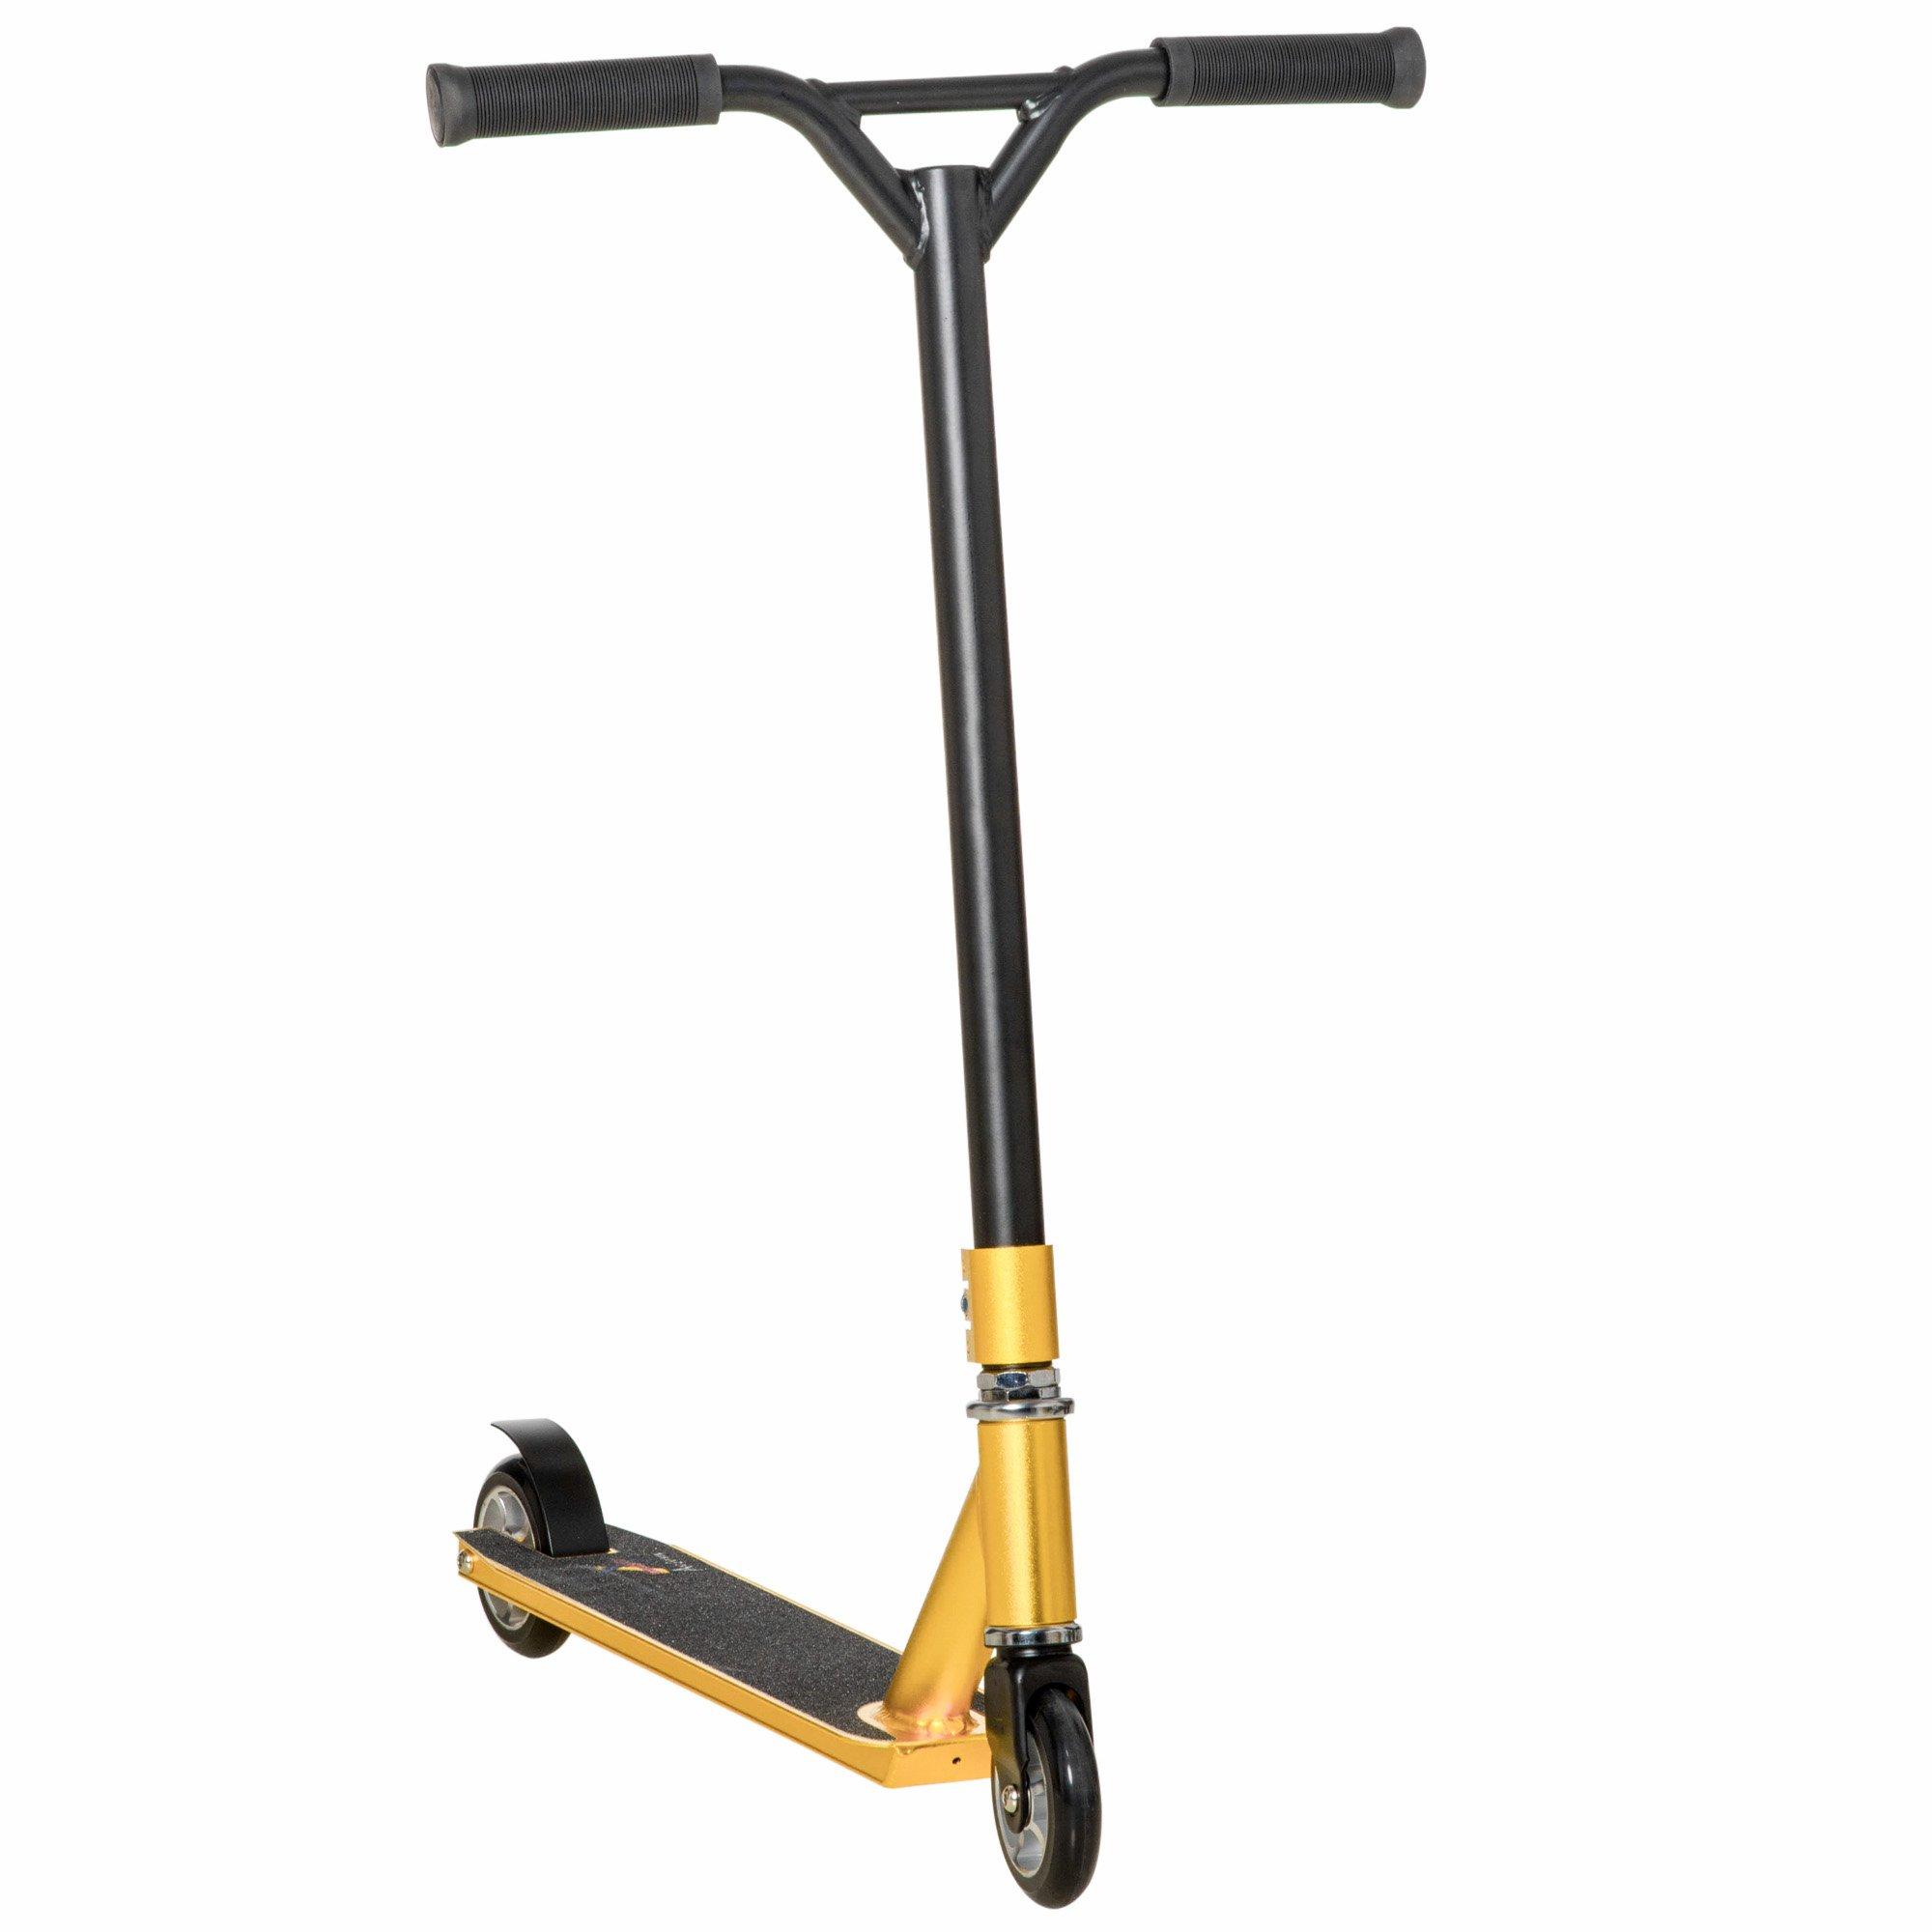 Stunt Scooter Entry Level Tricks Scooter for 14+ Beginners, Gold